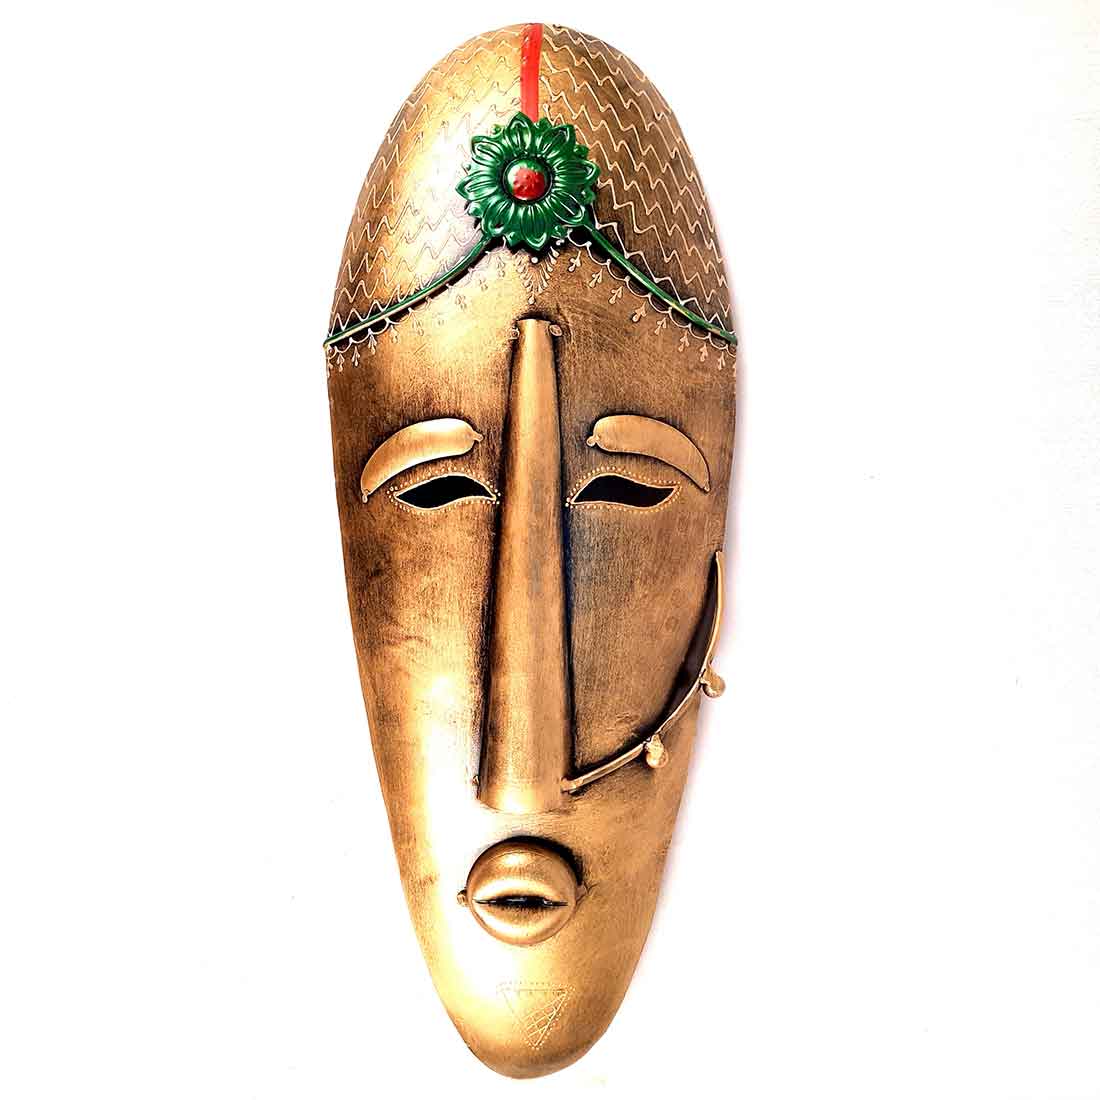 Tribal King Queen Mask Wall Hanging  - for Home | Office | Cafés Interior Décor - 21 Inch - ApkaMart